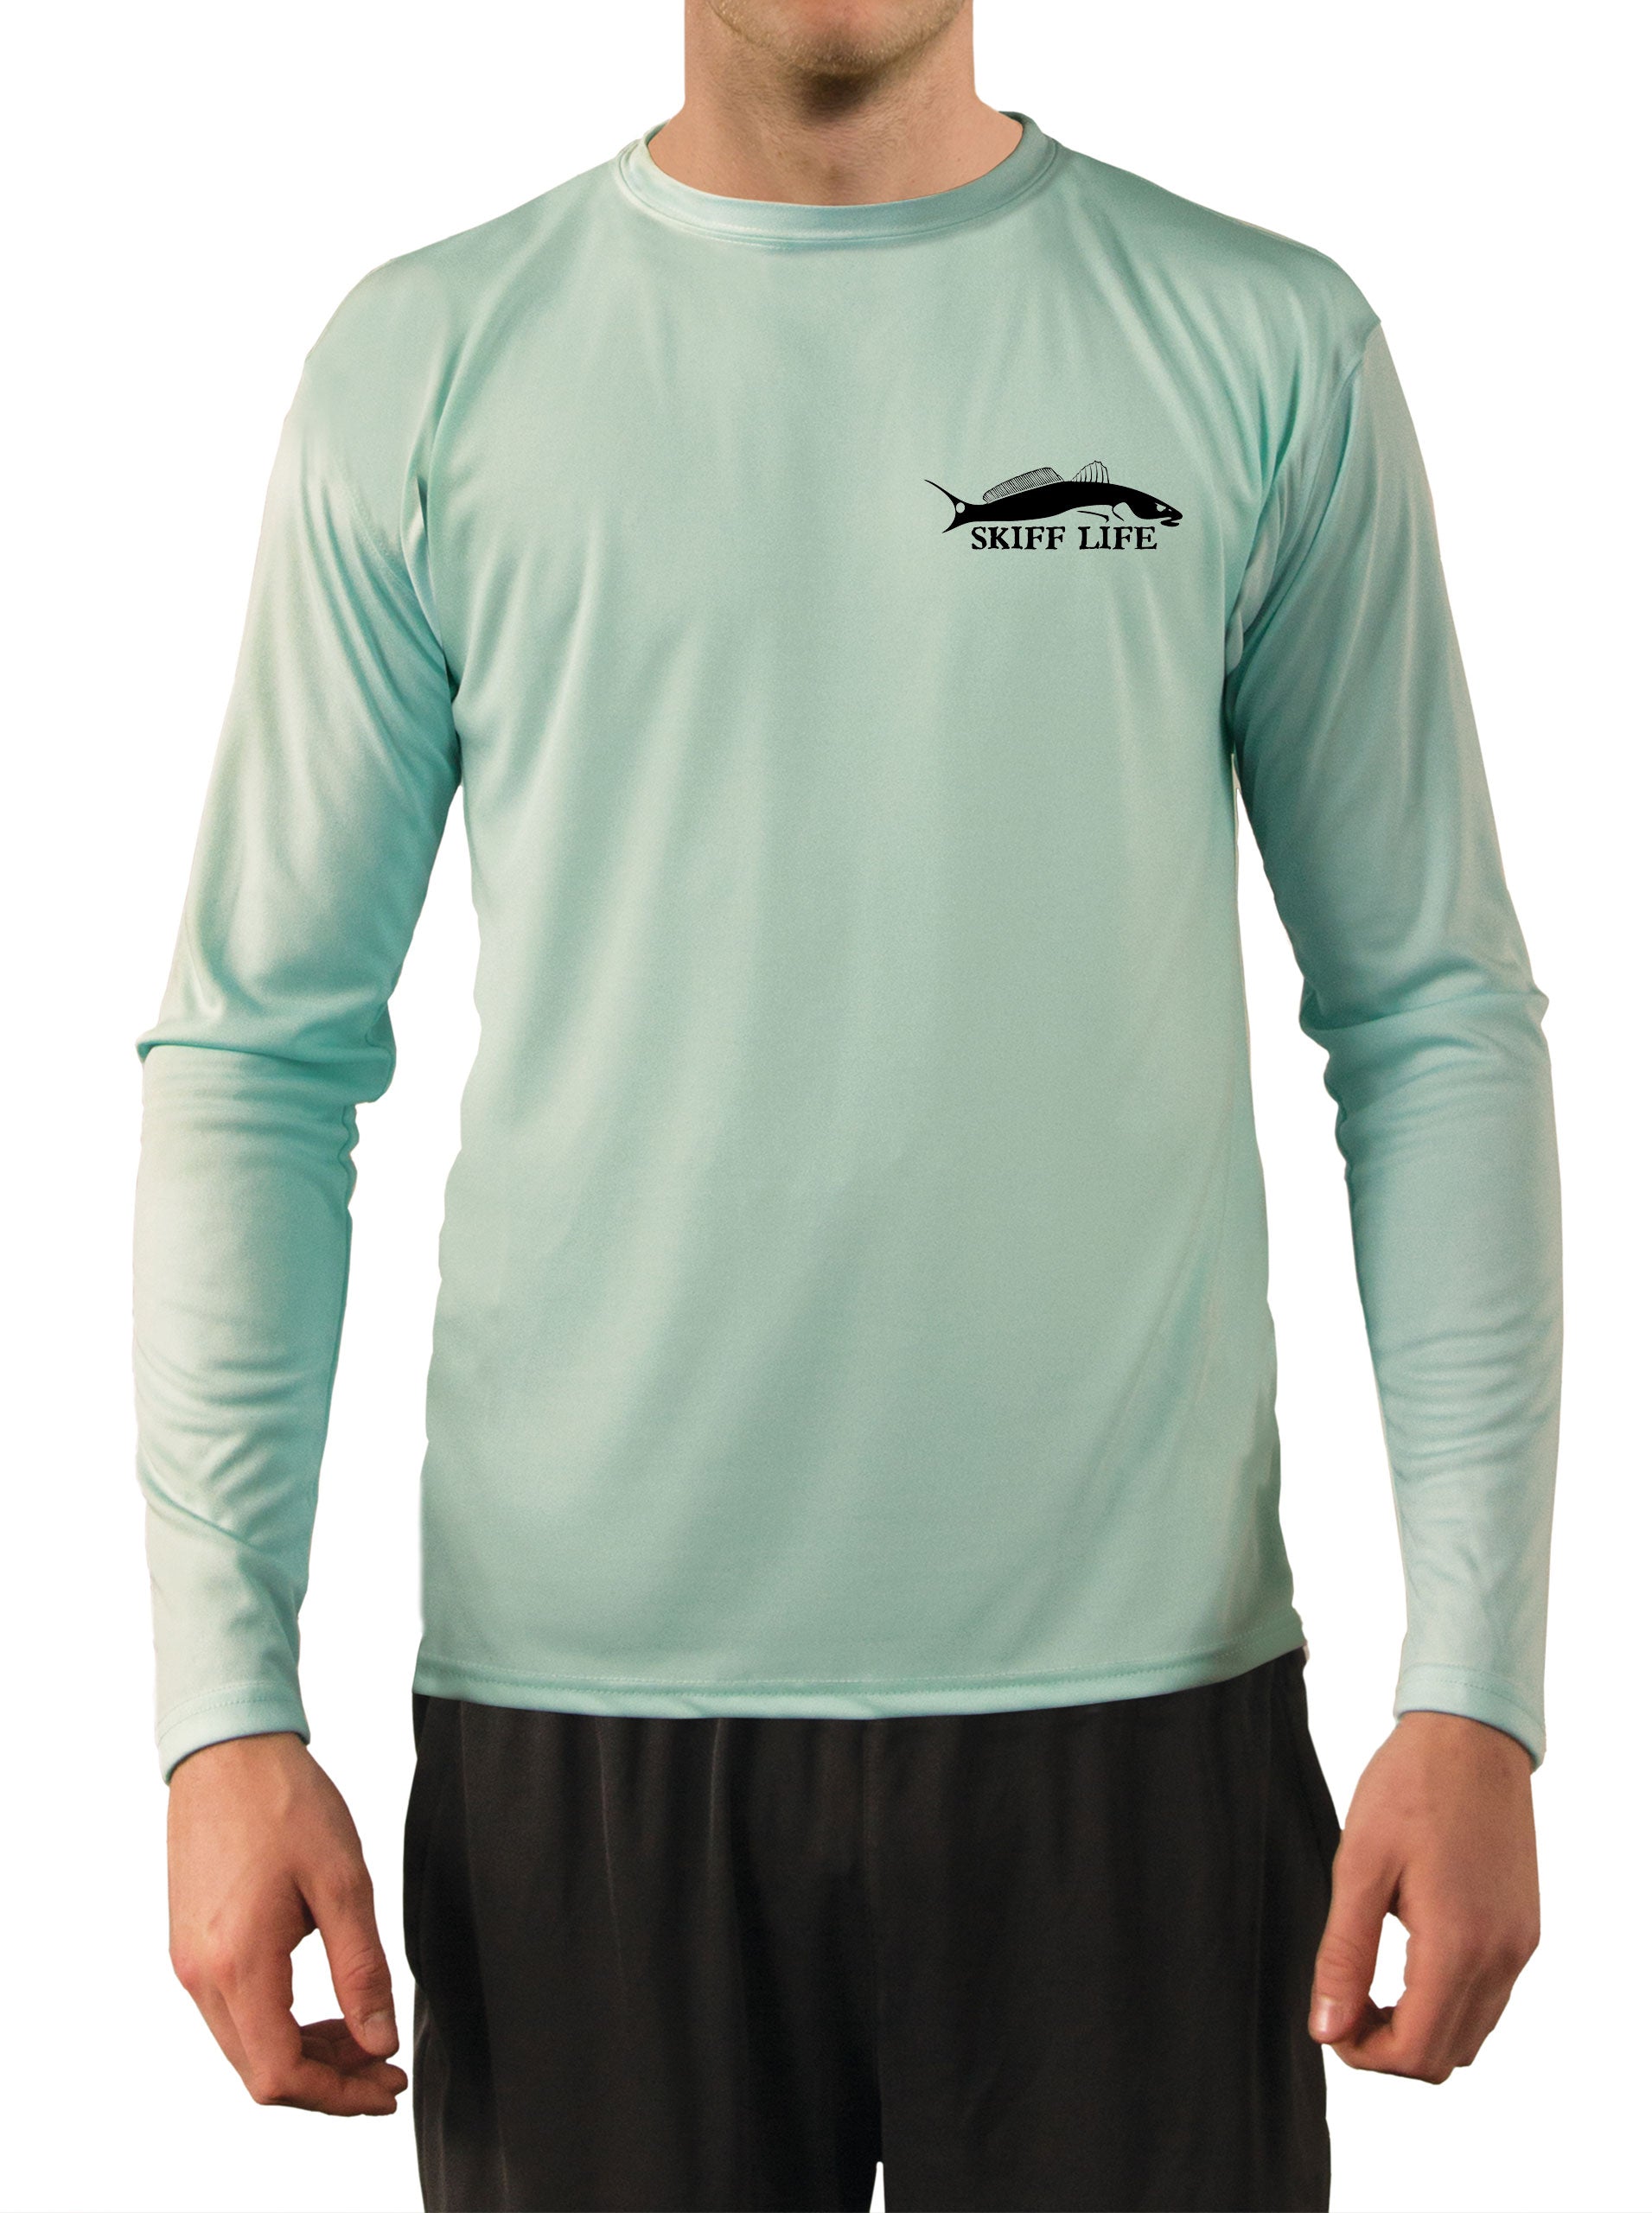 Flounder Fishing Shirts for Men Fluke - UV Protected +50 Sun Protection with Moisture Wicking Technology 4XL / Ice Blue